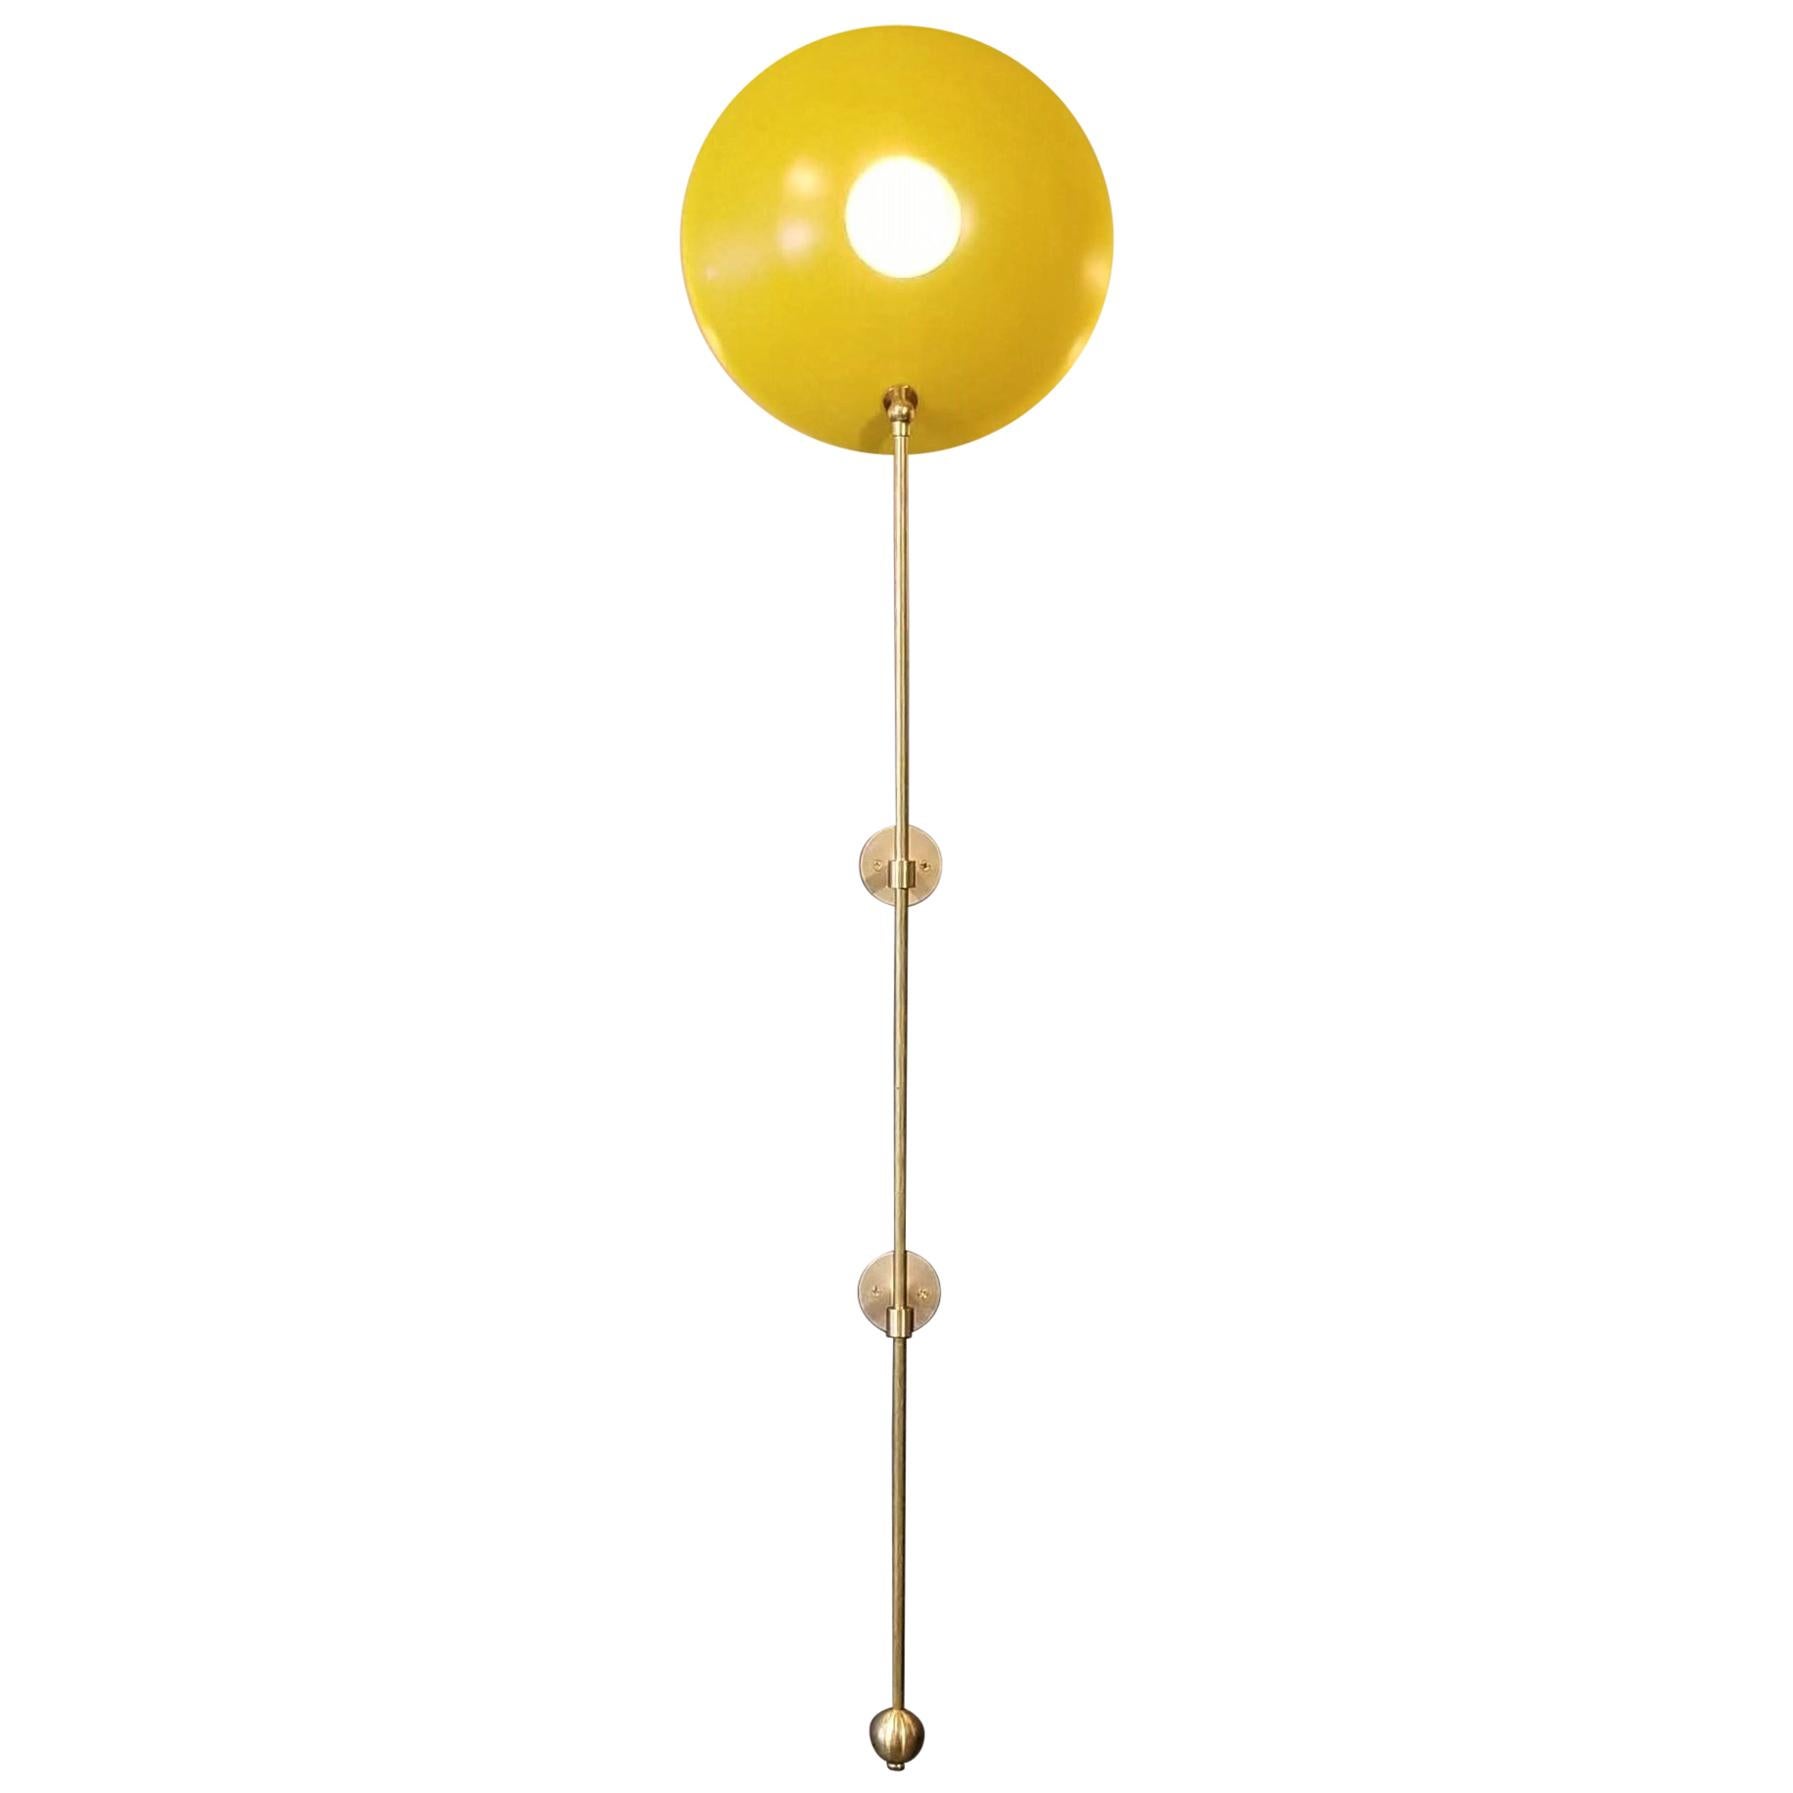 Large "POP" Wall Sconce in Brass and Yellow Enamel by Blueprint Lighting